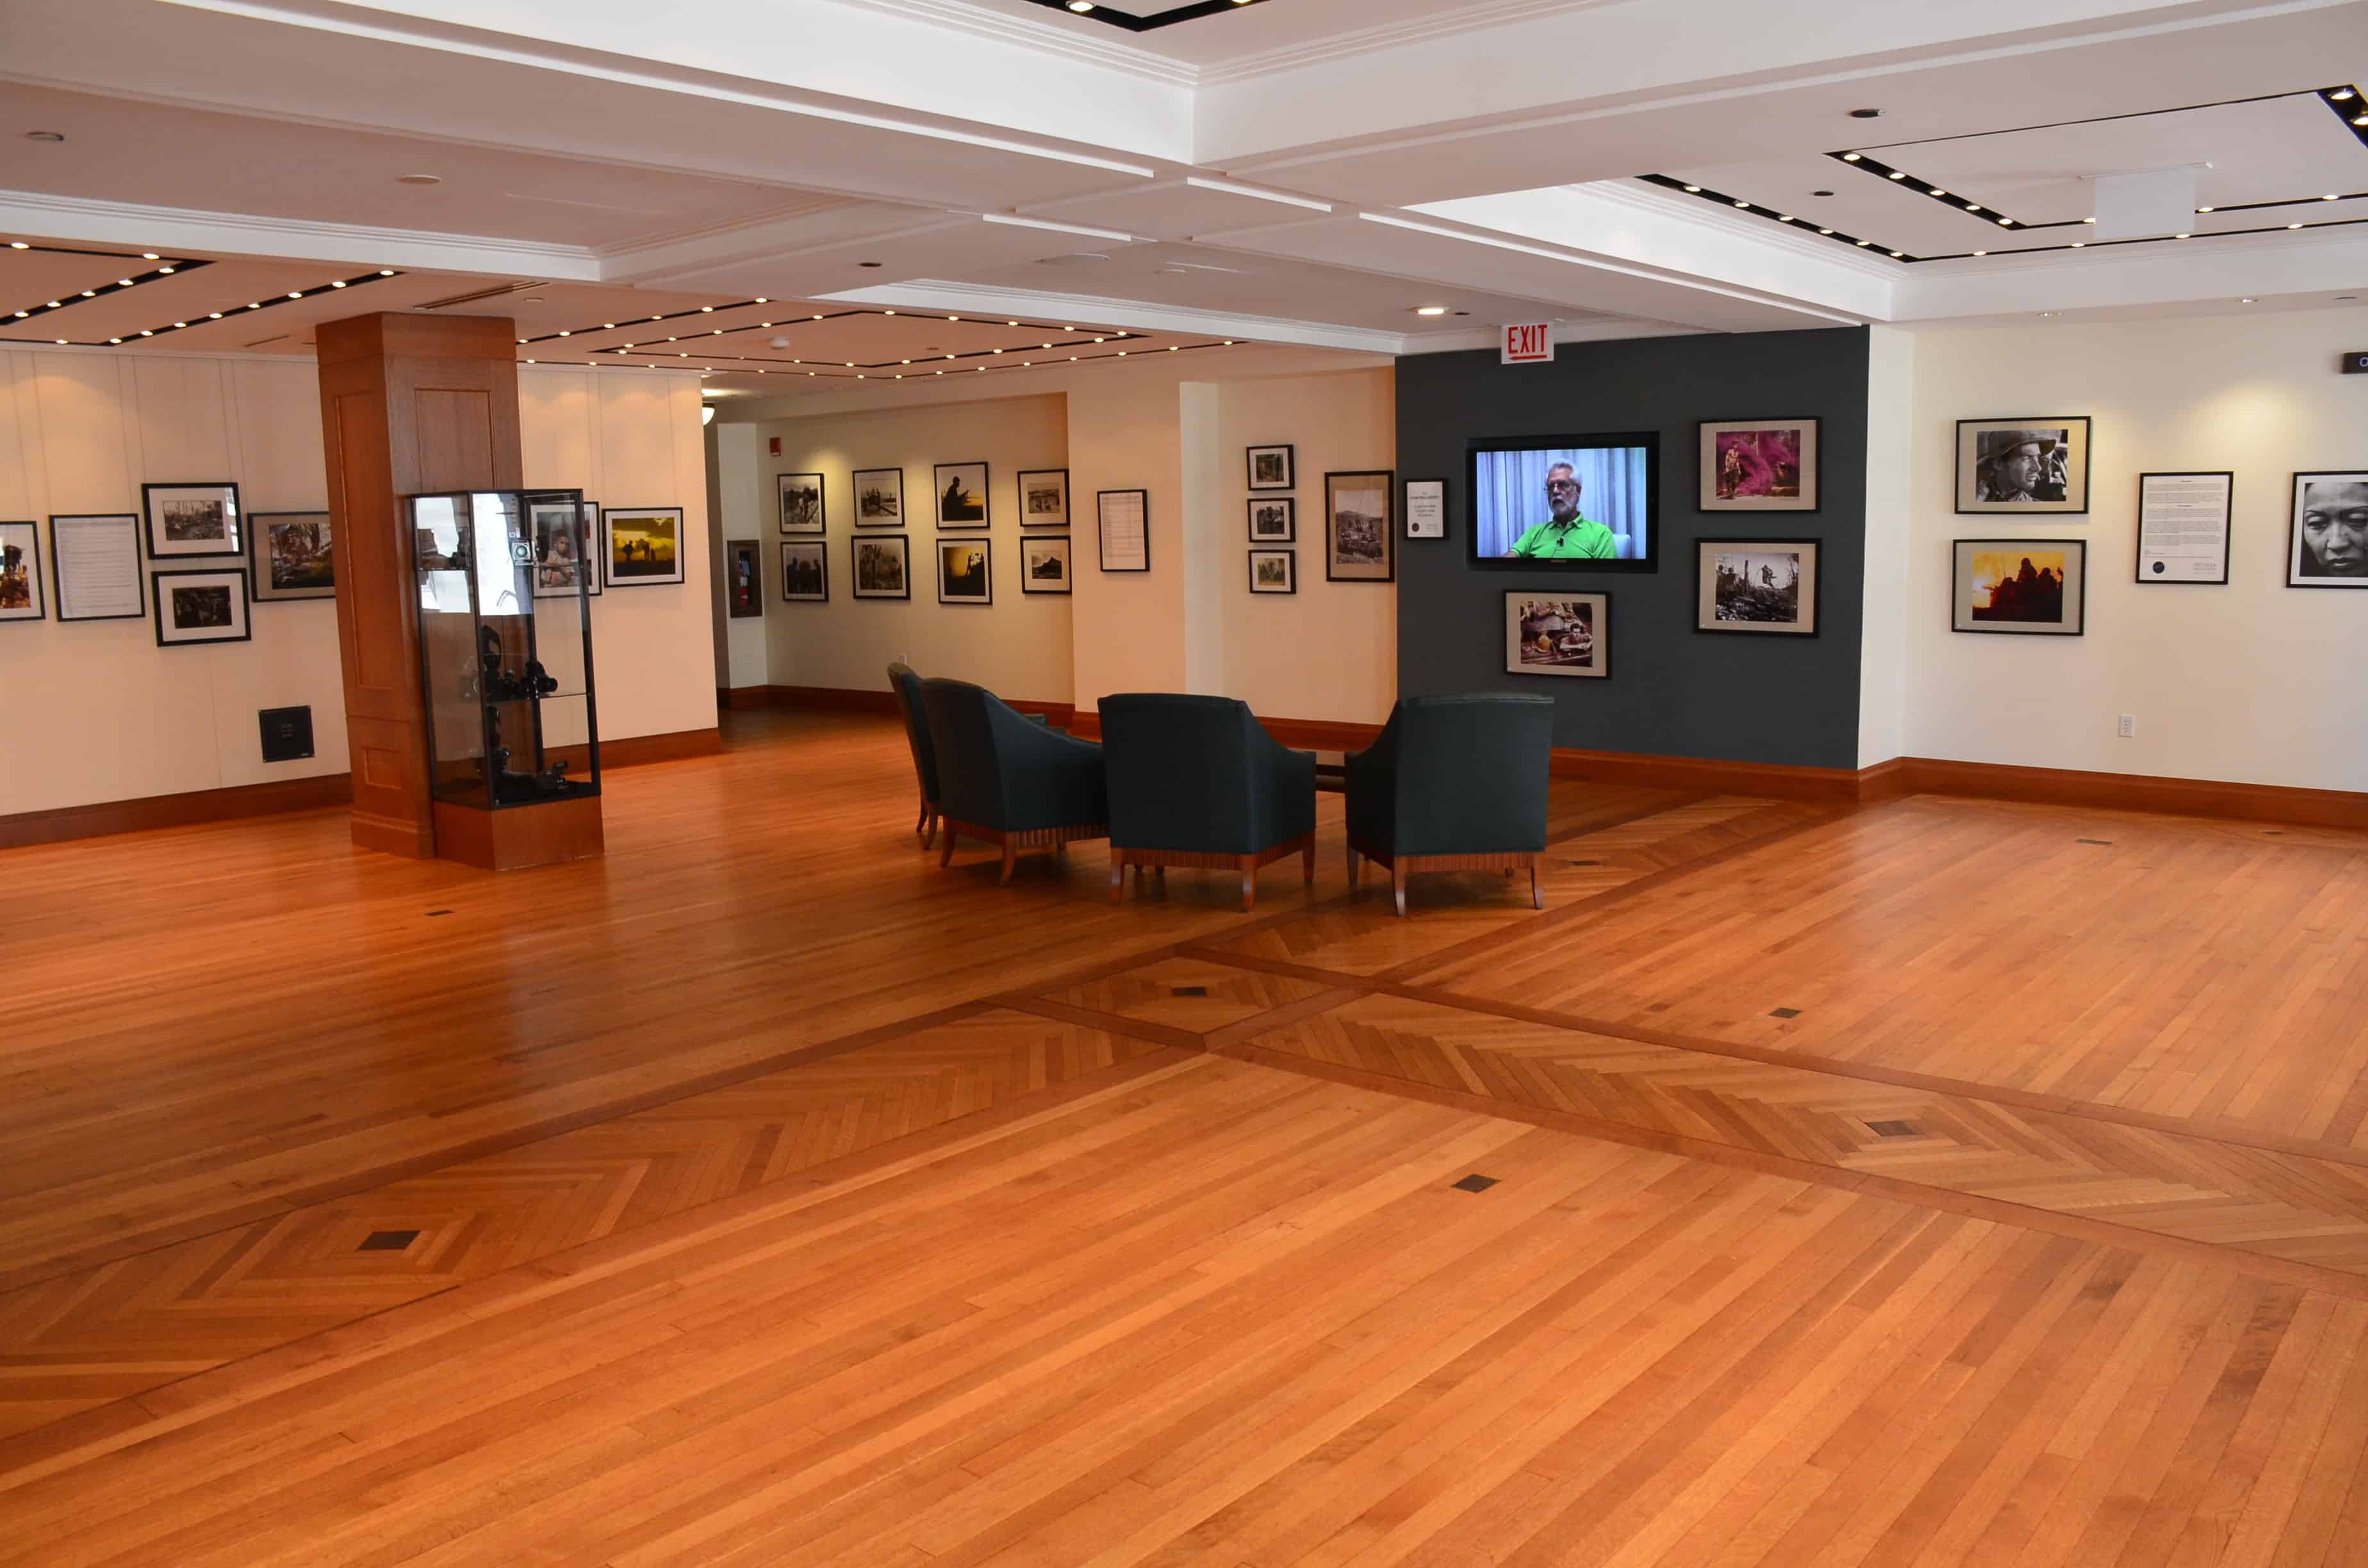 Oral history room at the Pritzker Military Museum in Chicago, Illinois